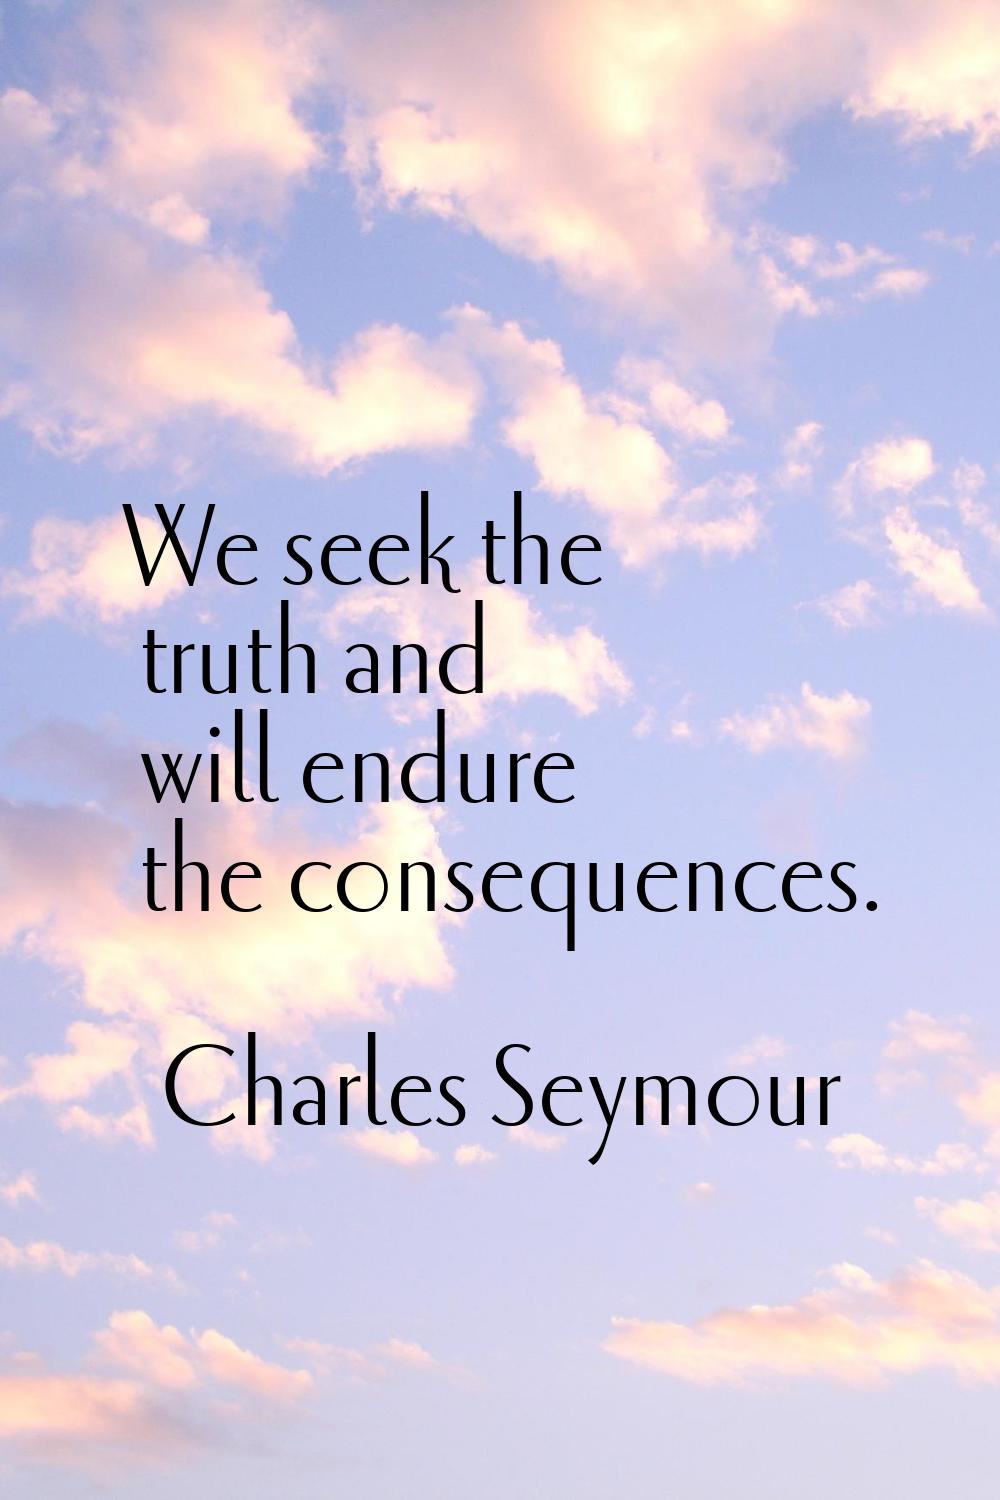 We seek the truth and will endure the consequences.